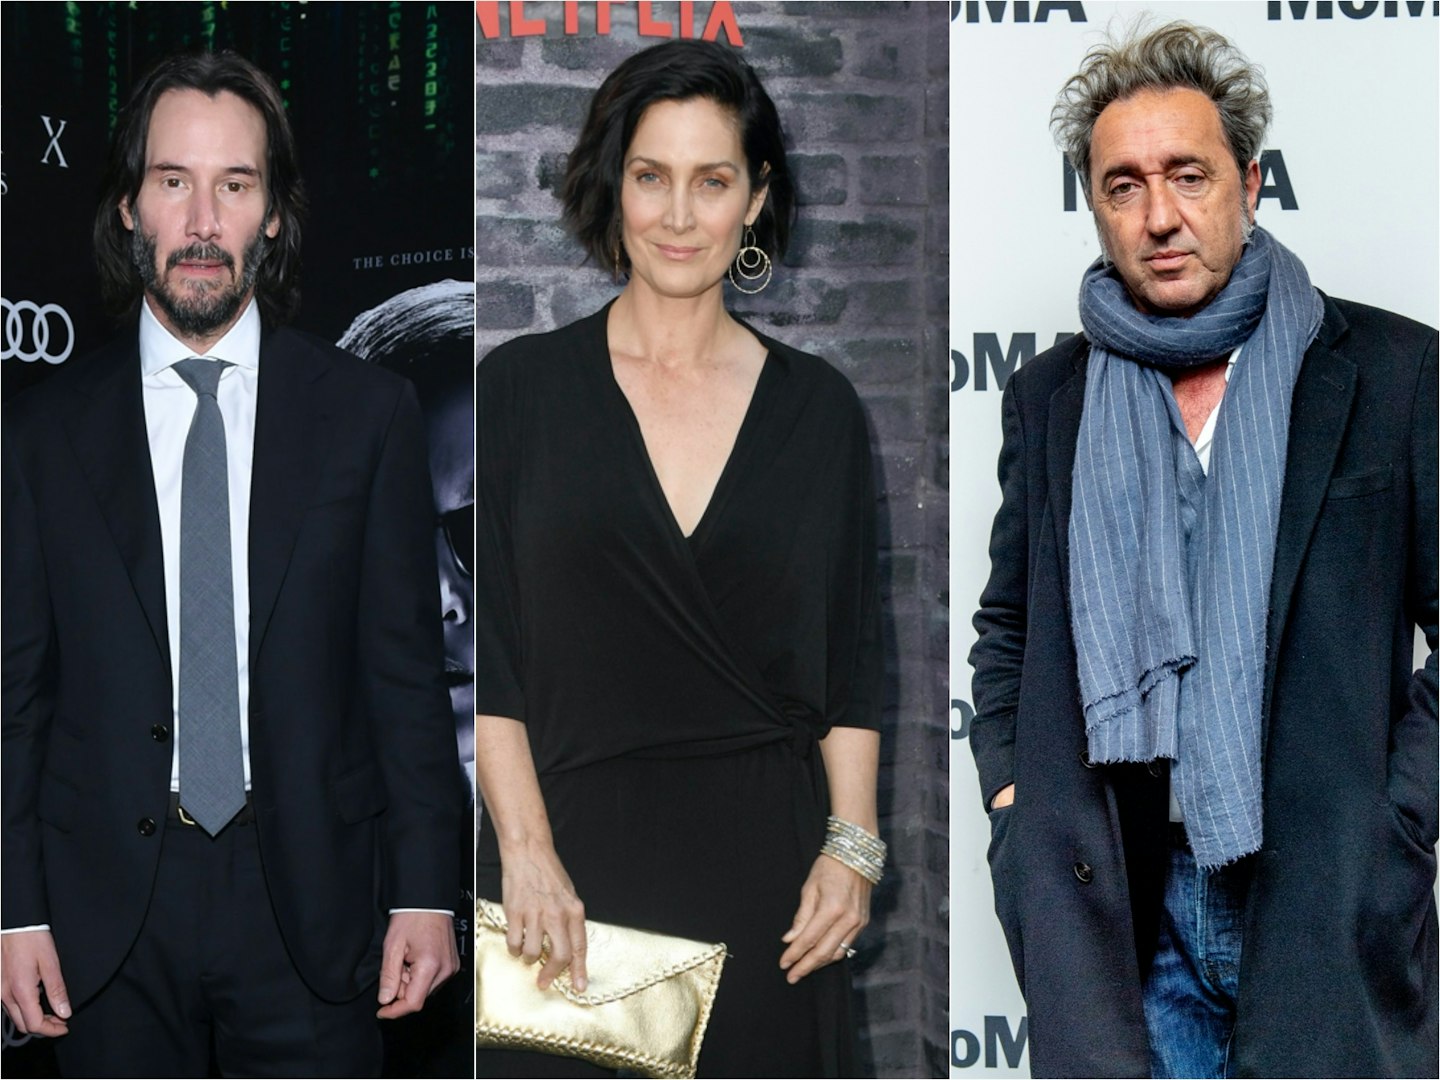 Keanu Reeves, Carrie-Anne Moss, Paolo Sorrentino